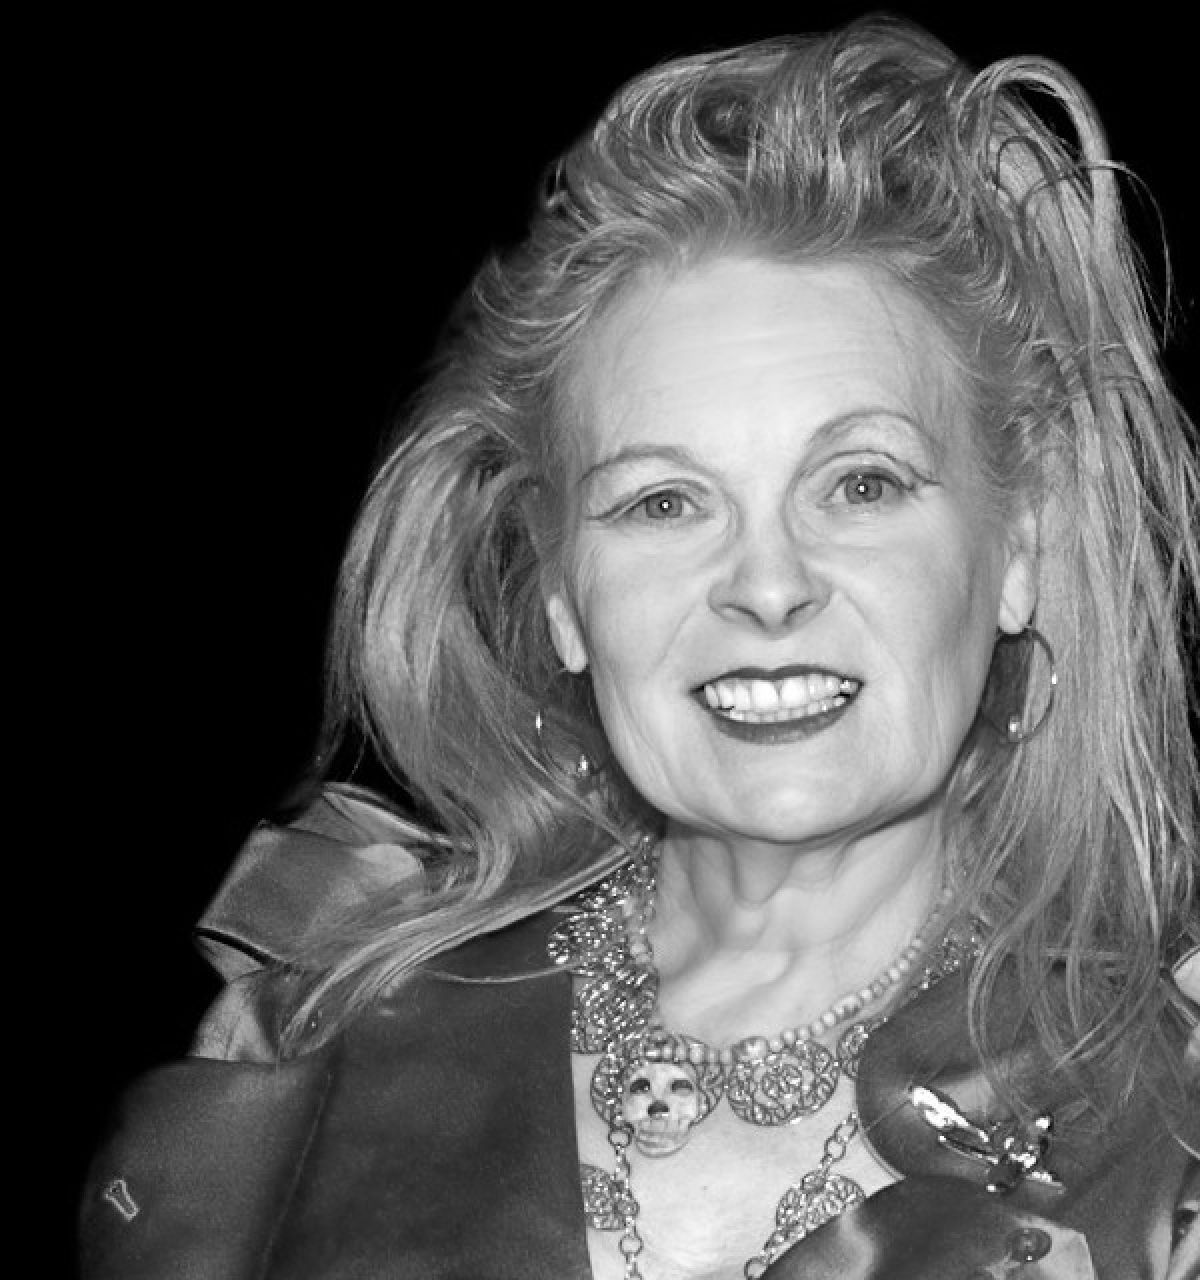 Vivienne Westwood: The ‘Queen of British Fashion’ and her orb